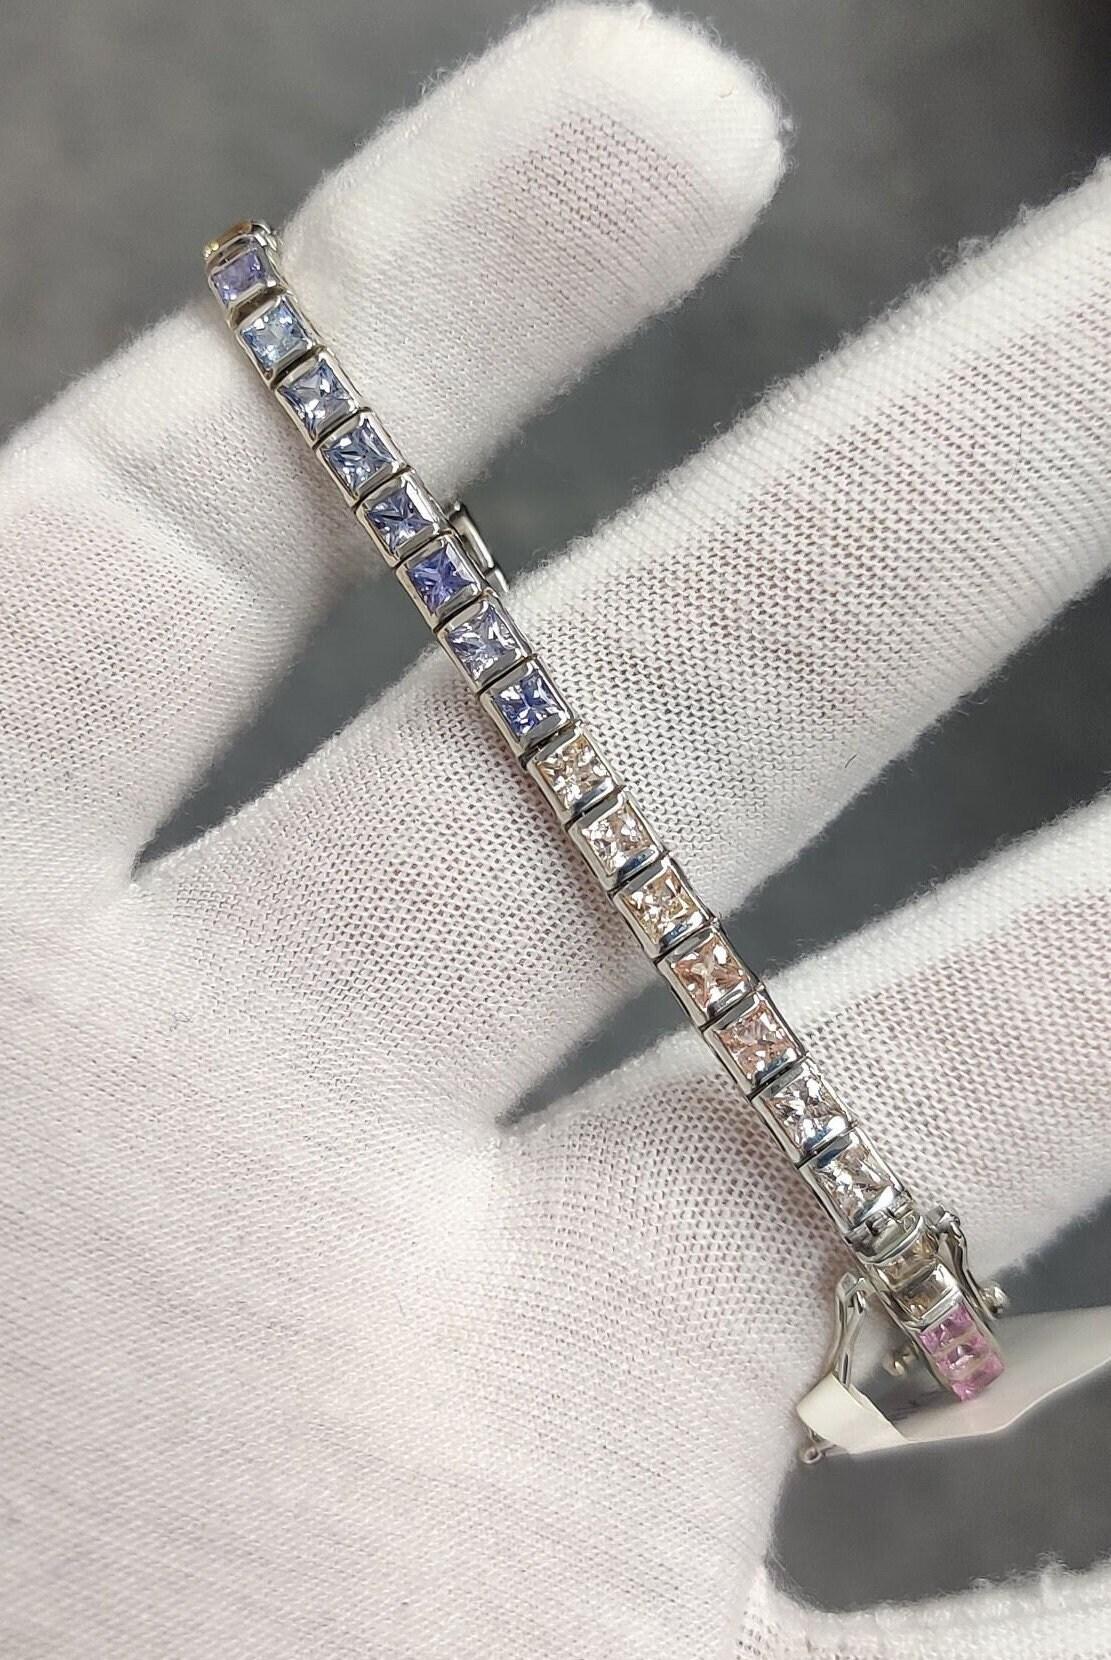 Presenting this beautiful Sapphire Studded Bracelet that is made in high quality Silver 925. All natural sapphires have been used. The multicolored Sapphires give a rainbow-like, and colorful look to this bracelet.

This multicolored bracelet is all